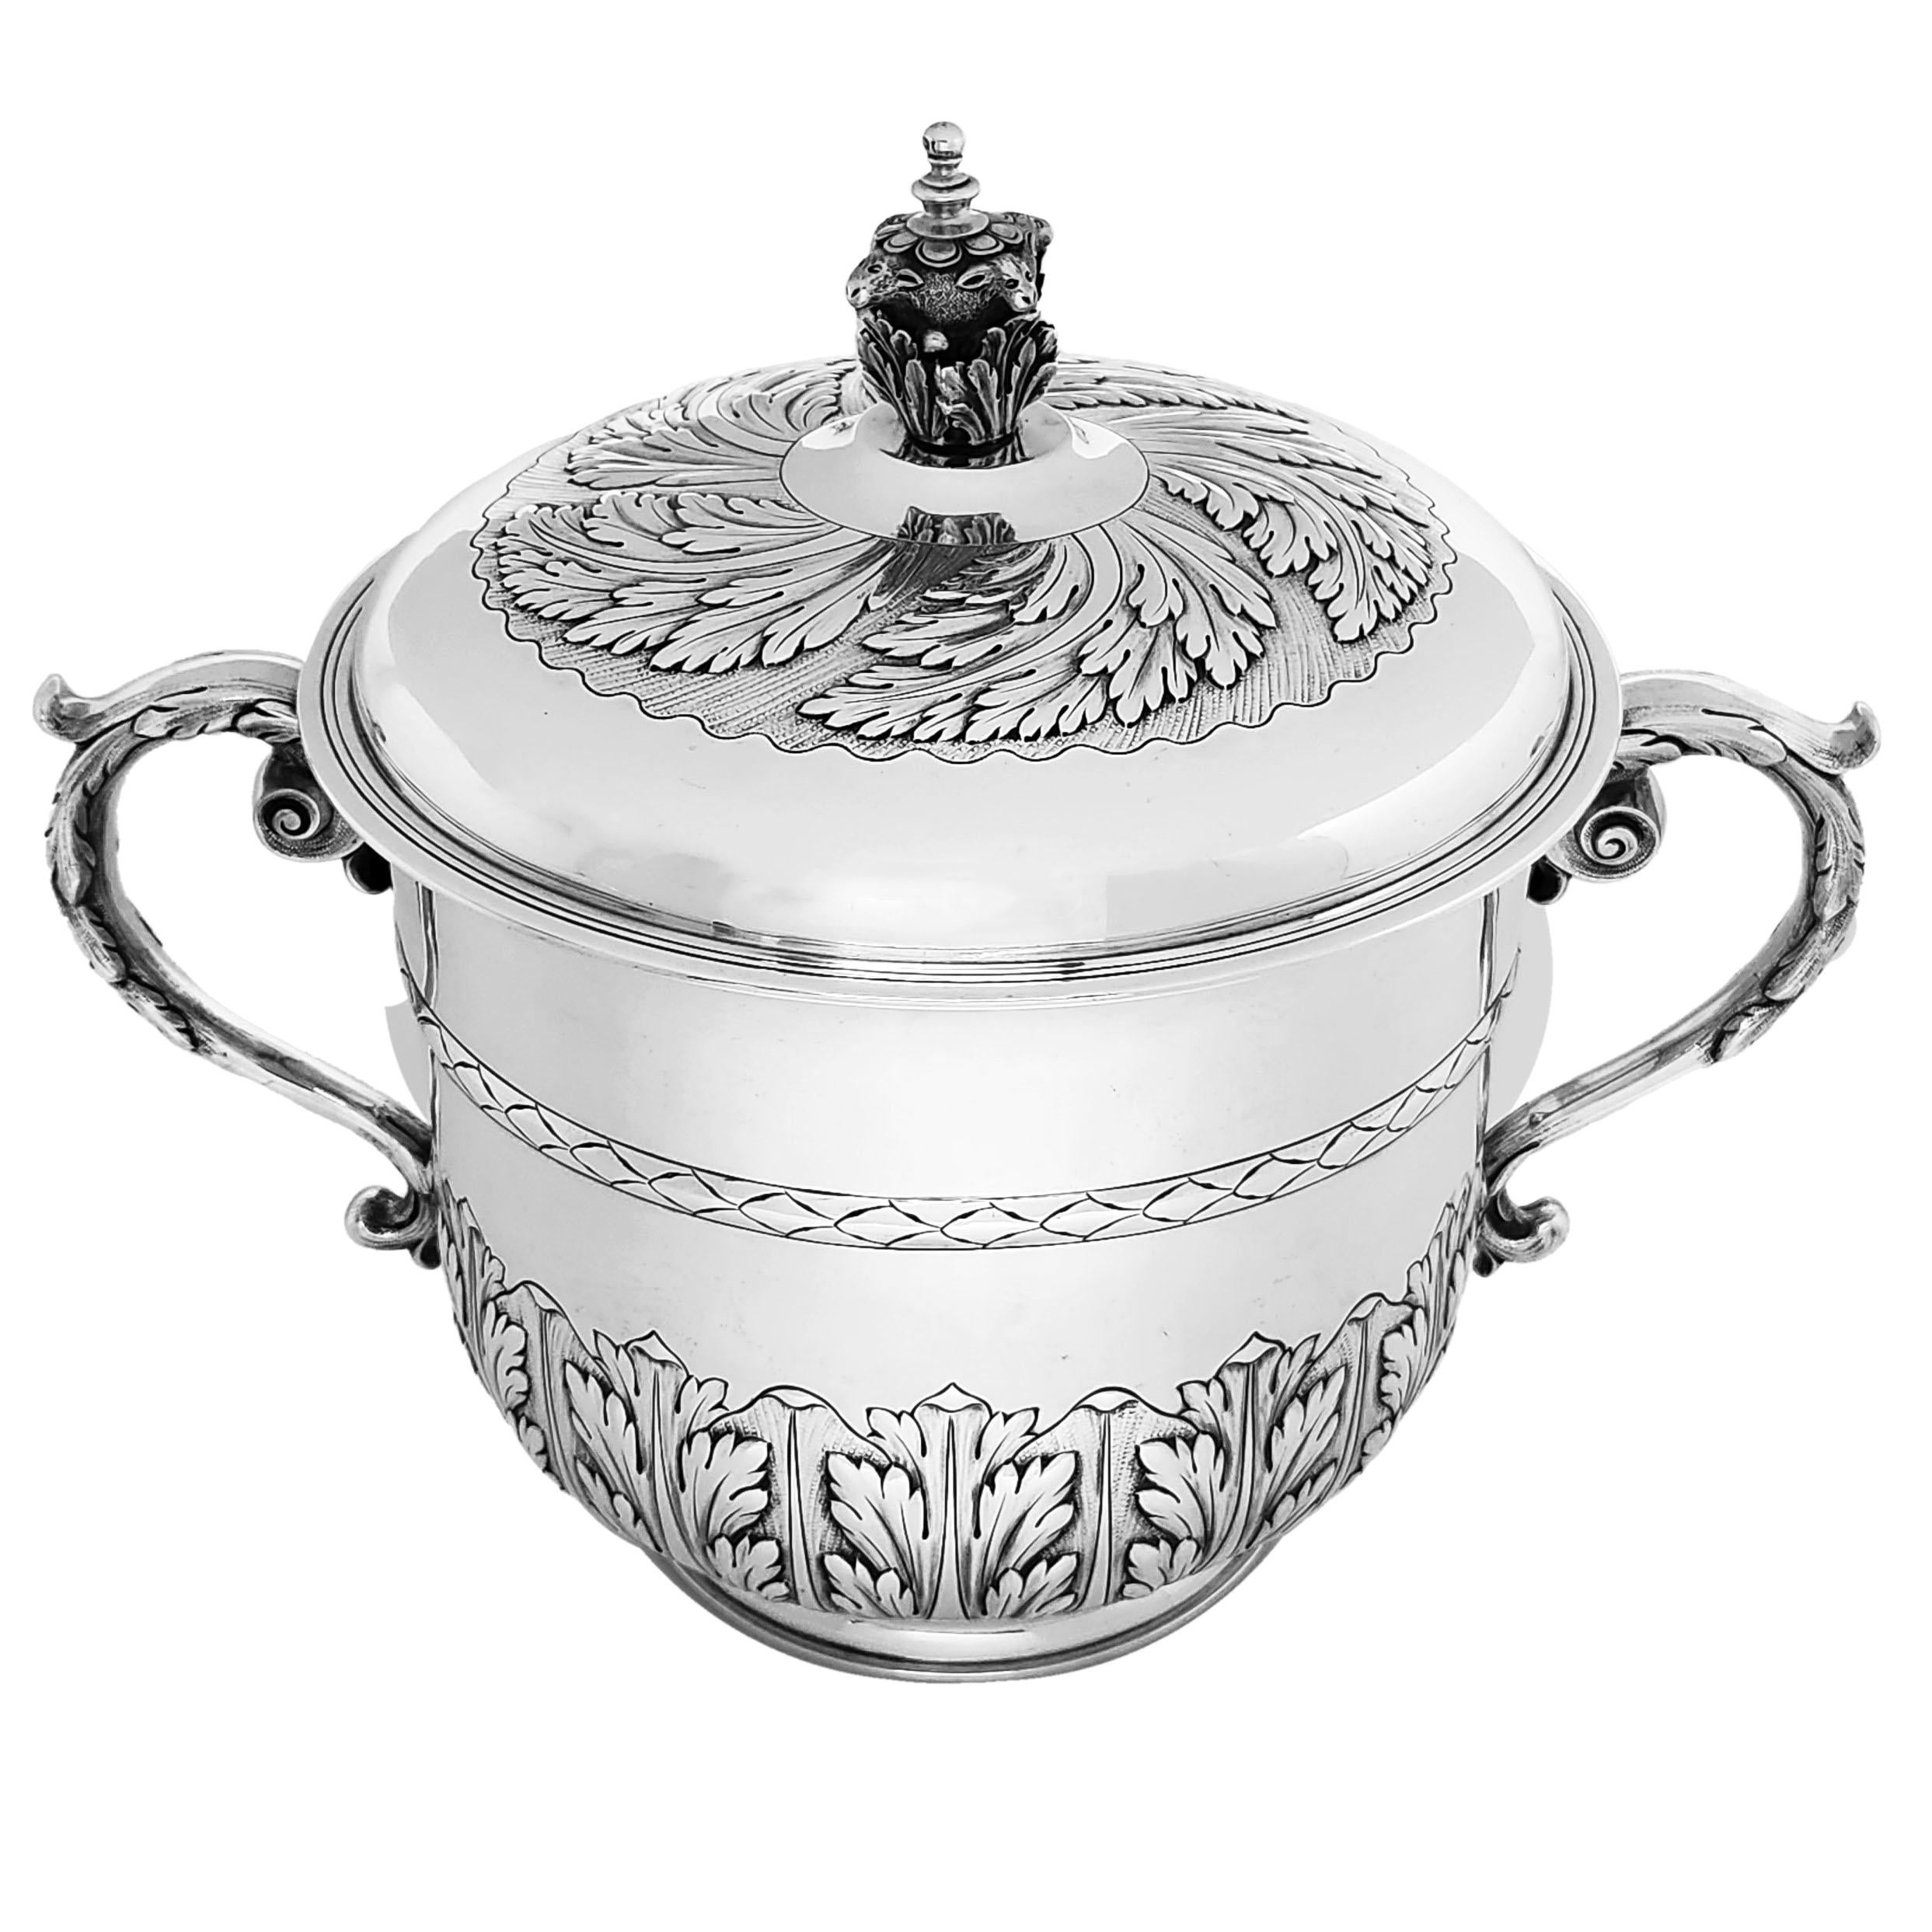 A magnificent Sterling Silver Lidded Cup in the style of a 17th Century Charles II Porringer. The Body and Lid of the Porringer are embellished with beautiful chased patterns featuring stylised foliate designs. The Lid of the Porringer has an